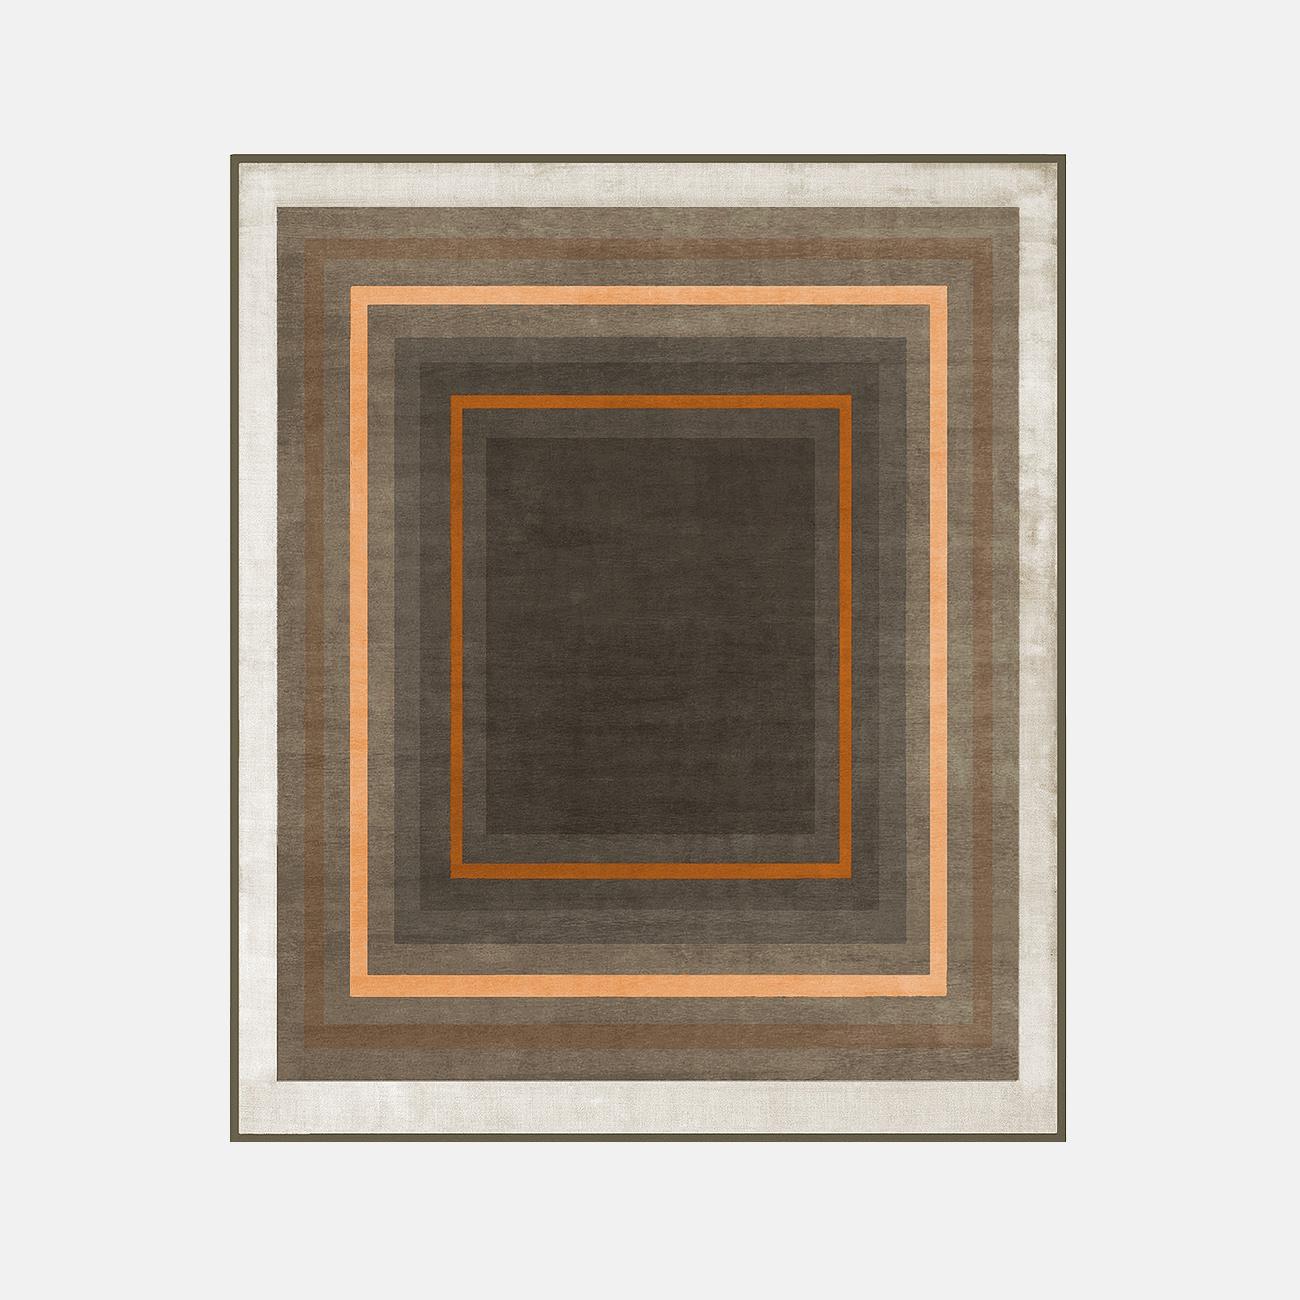 Eden Park Station Golden Hour Rug by Atelier Bowy C.D.
Dimensions: W 243 x L 300 cm.
Materials: Wool.
Available in Muted version.

Available in W140 x L220, W170 x L240, W210 x L300, W230 x L300, W243 x L300 cm.

Atelier Bowy C.D. is dedicated to